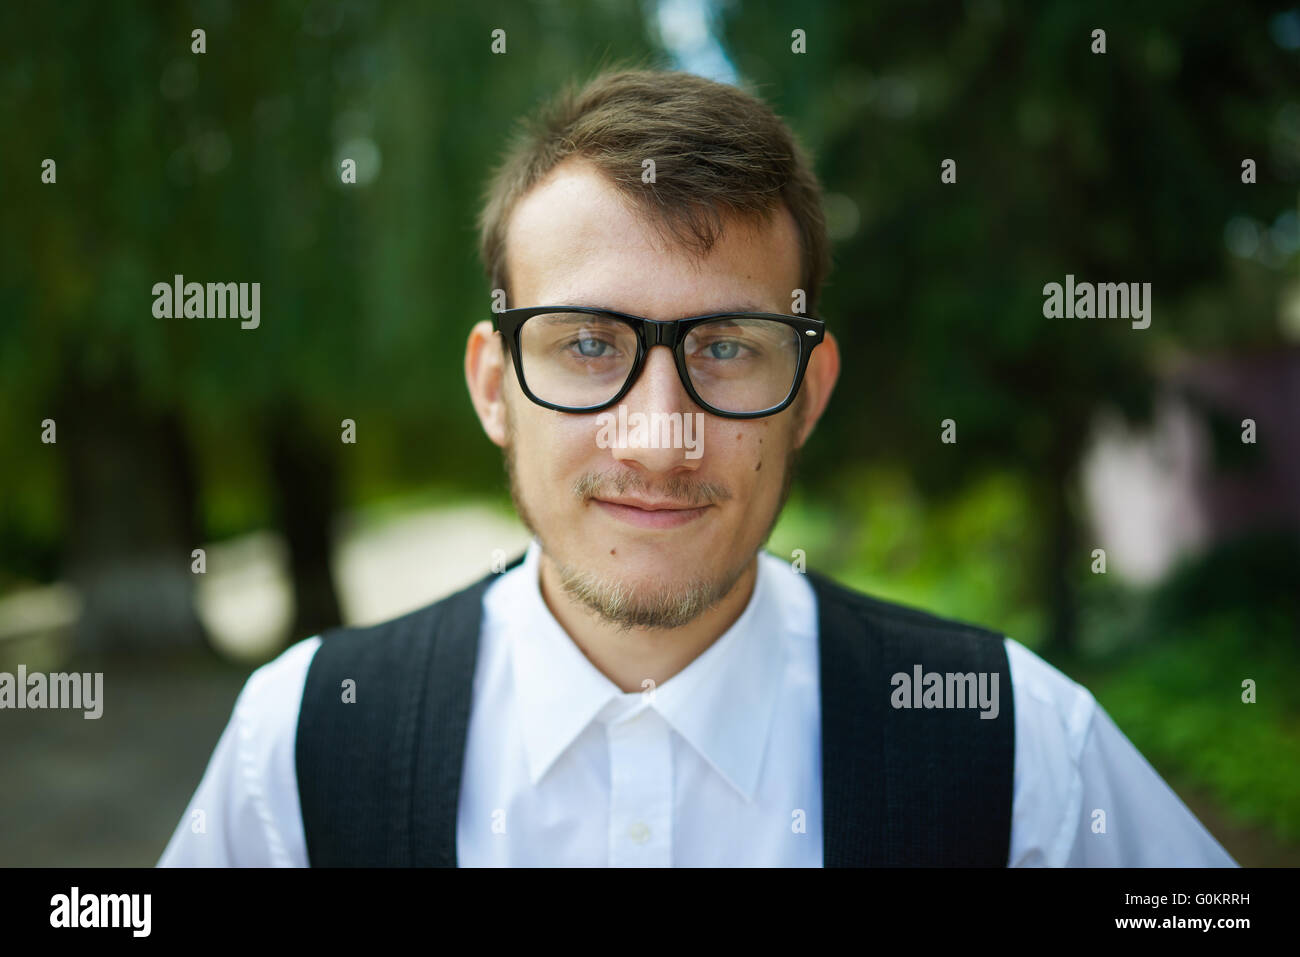 young hipster boy with glasses Stock Photo